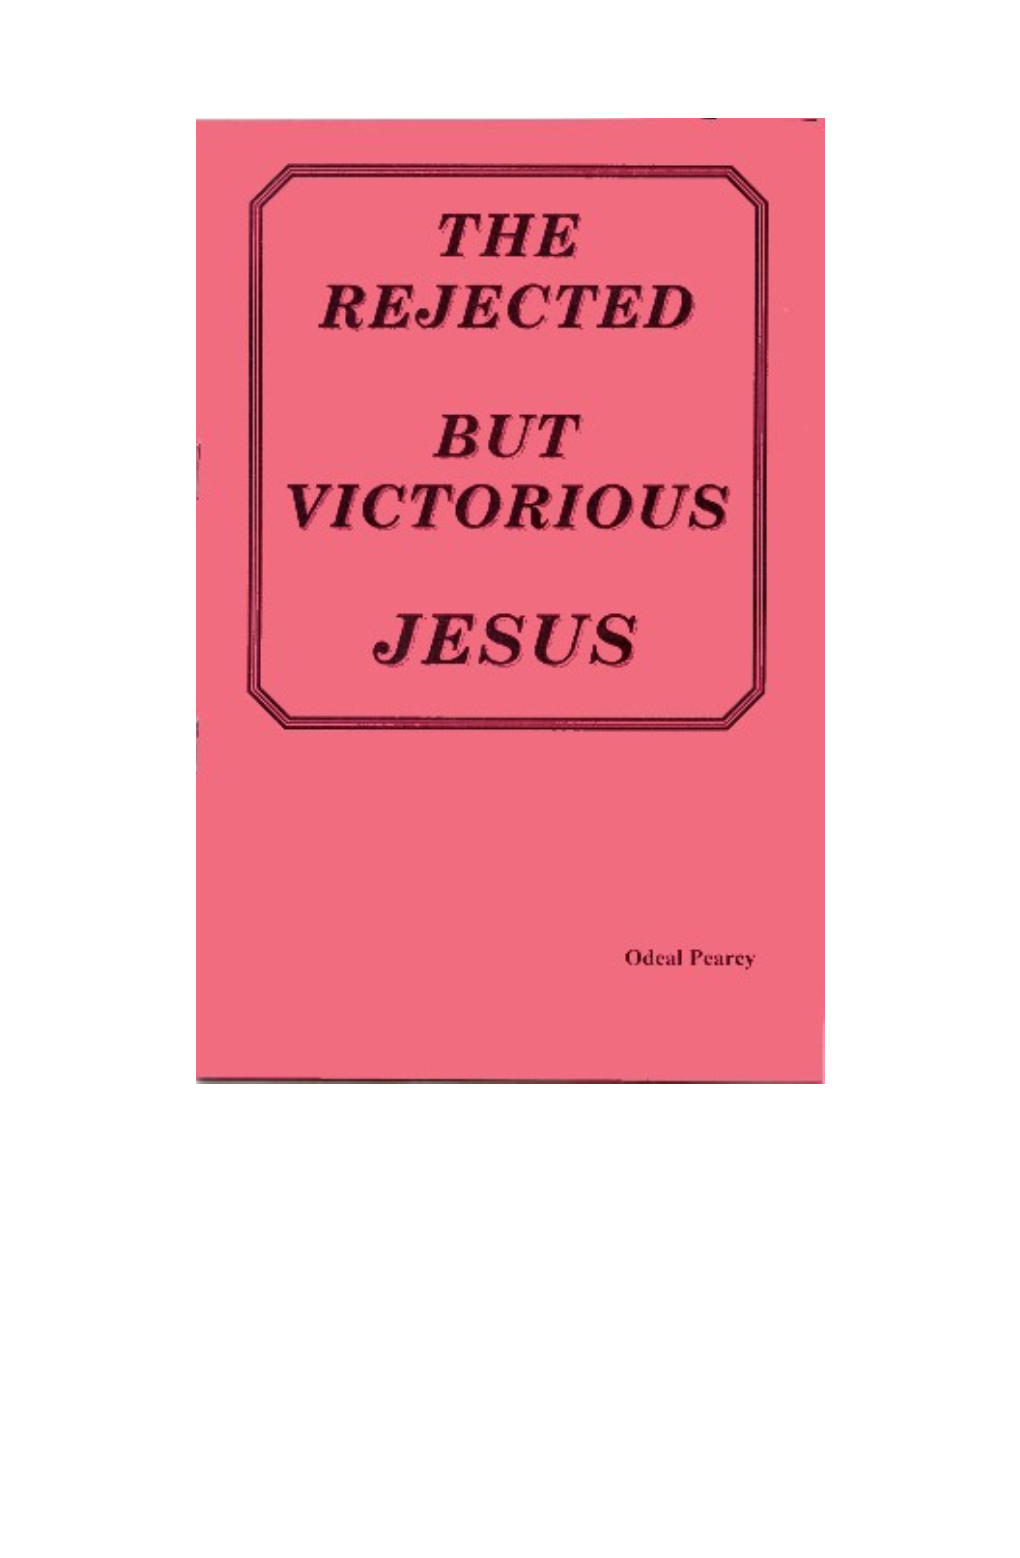 This Book, Entitled the Rejected, but Victorious Jesus, Is One That Needs to Be Read By